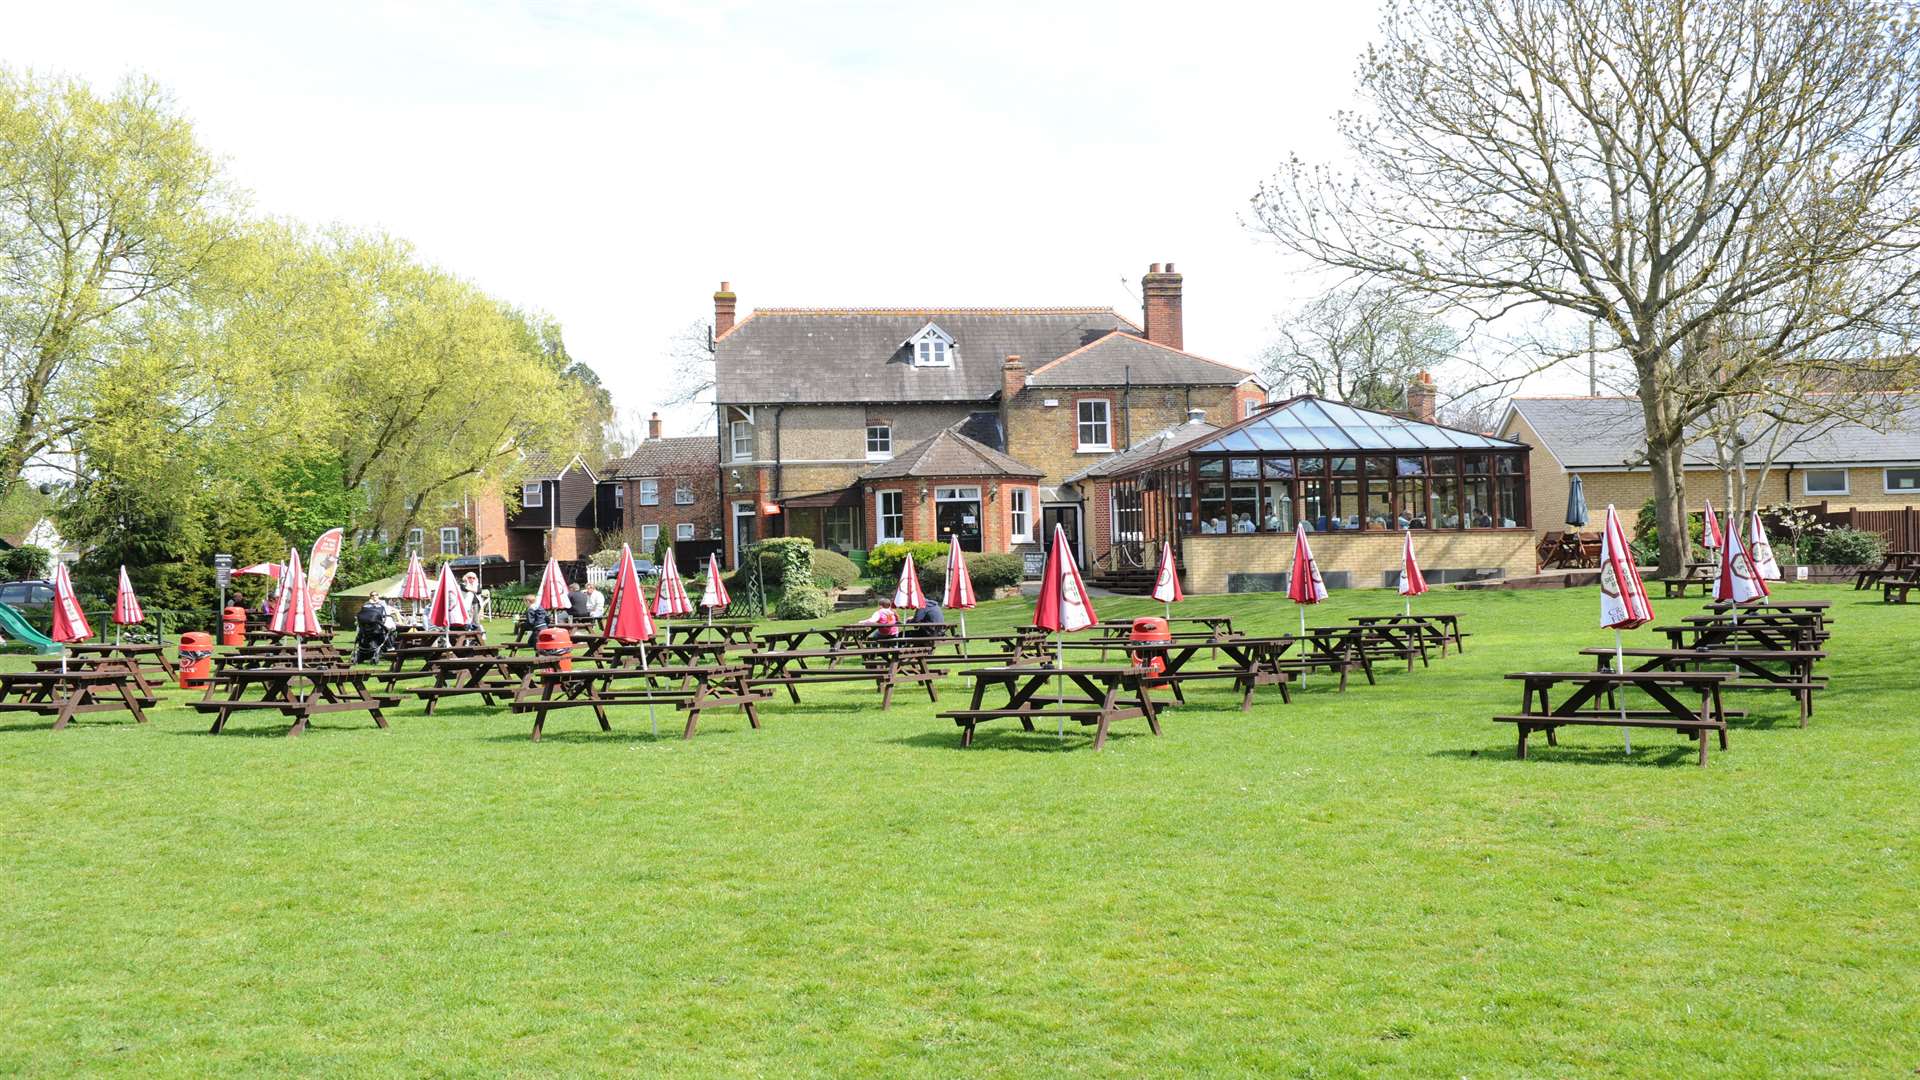 The pub has won awards for food and drink